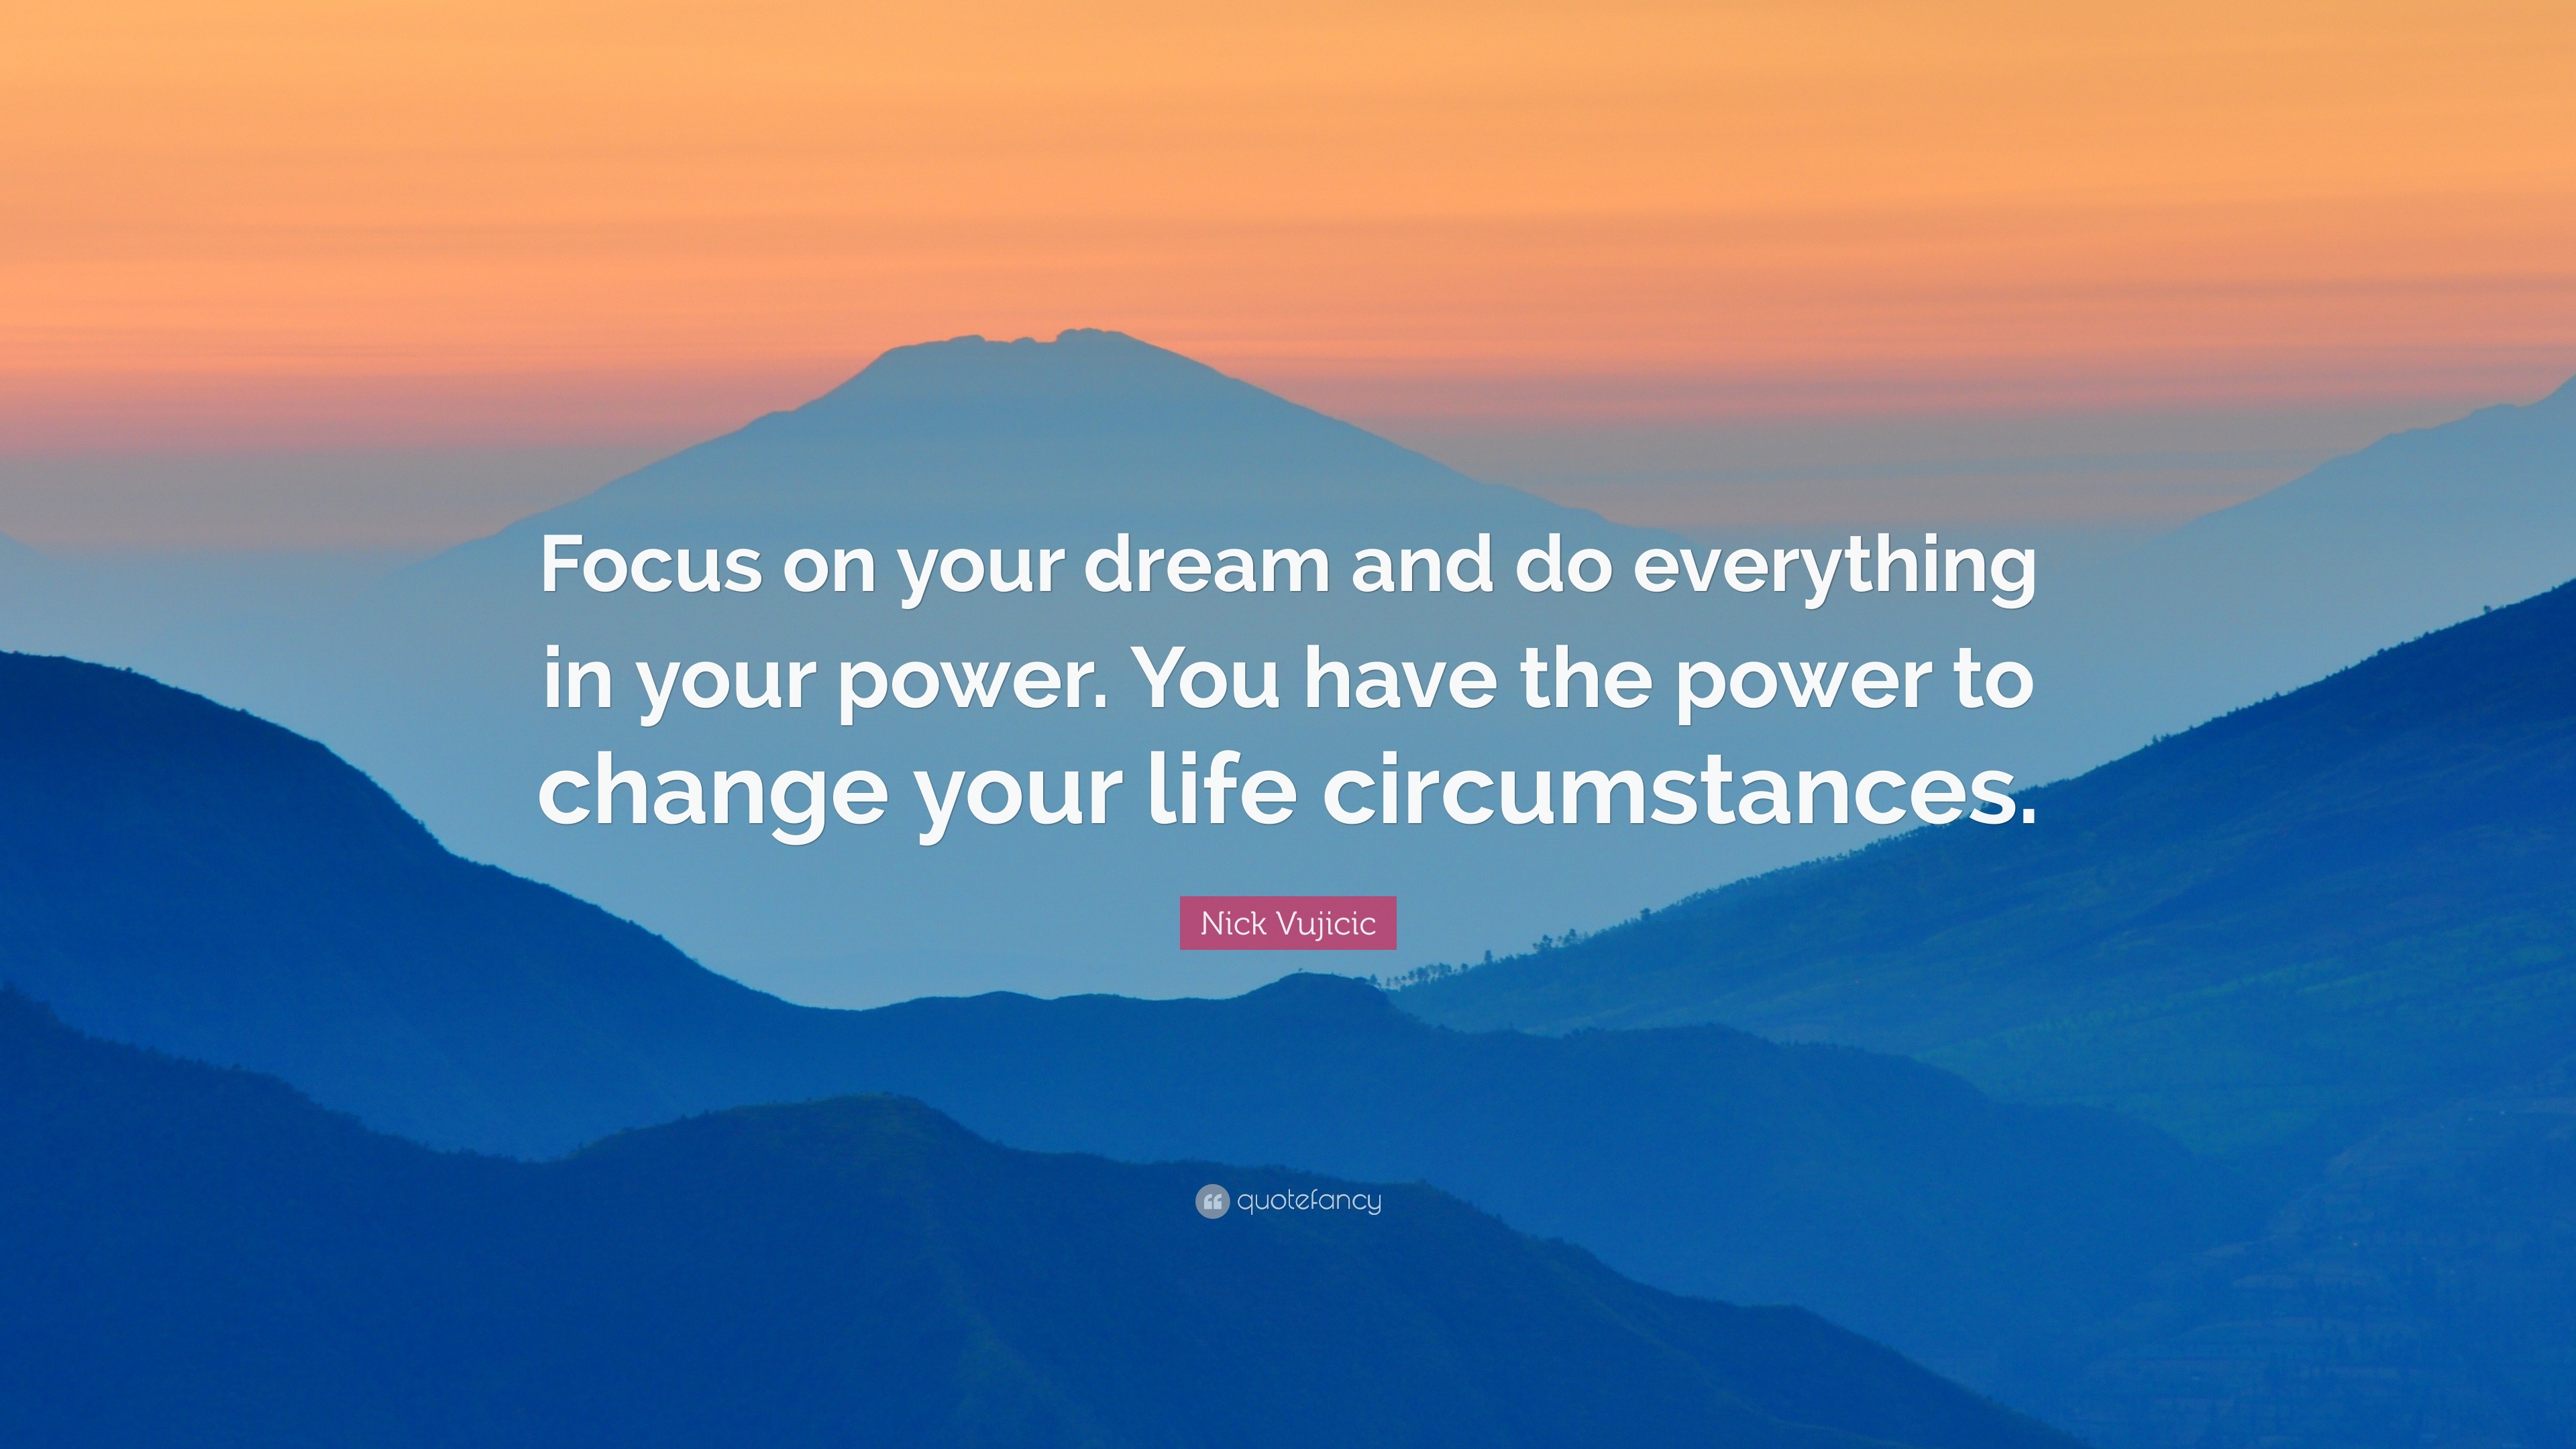 Nick Vujicic Quote “Focus on your dream and do everything in your power